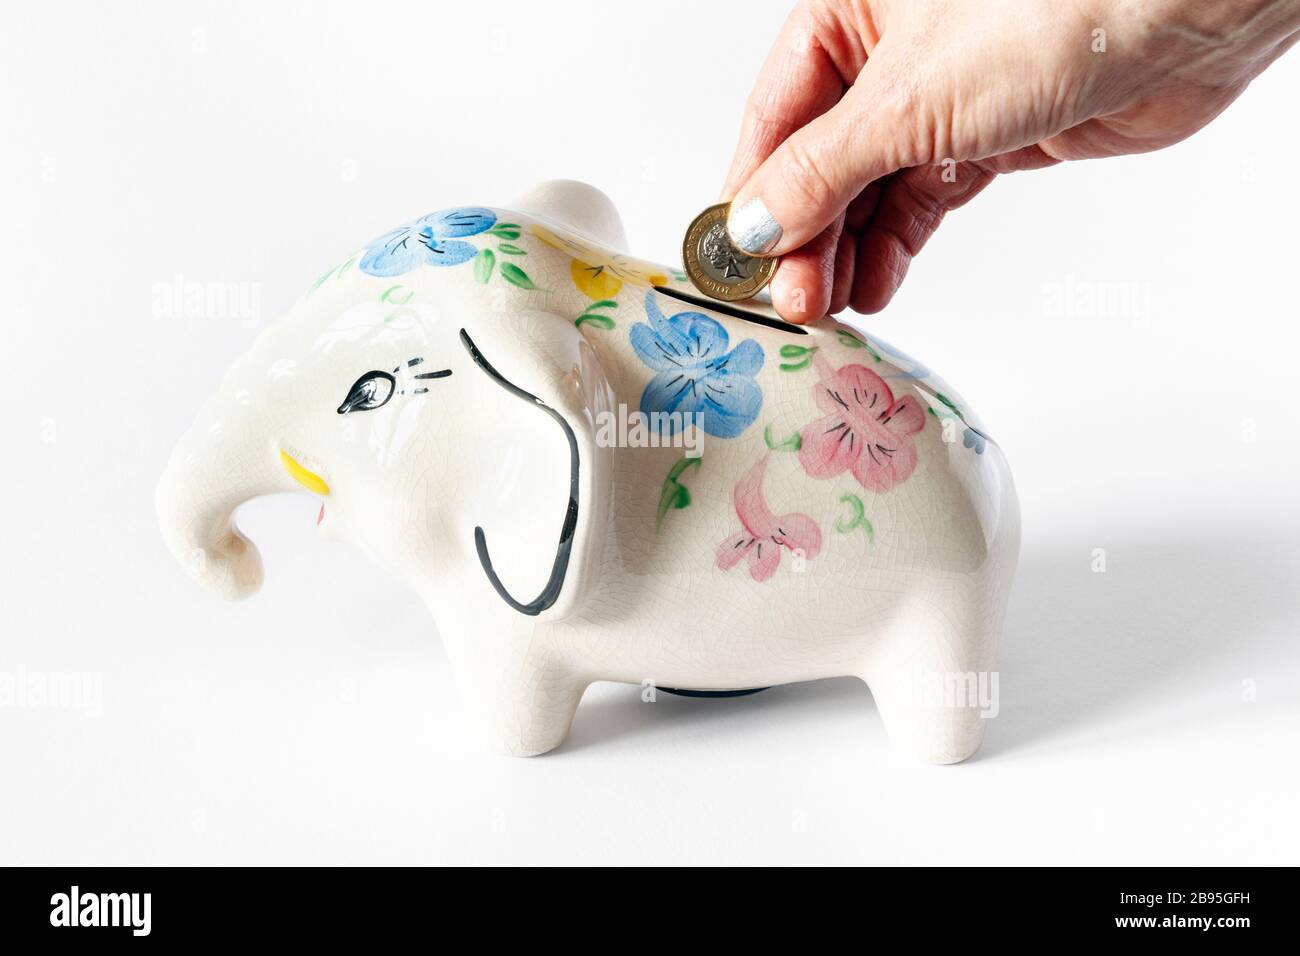 Female hand with silver nail varnish inserting a pound coin into a ceramic elephant money box Stock Photo